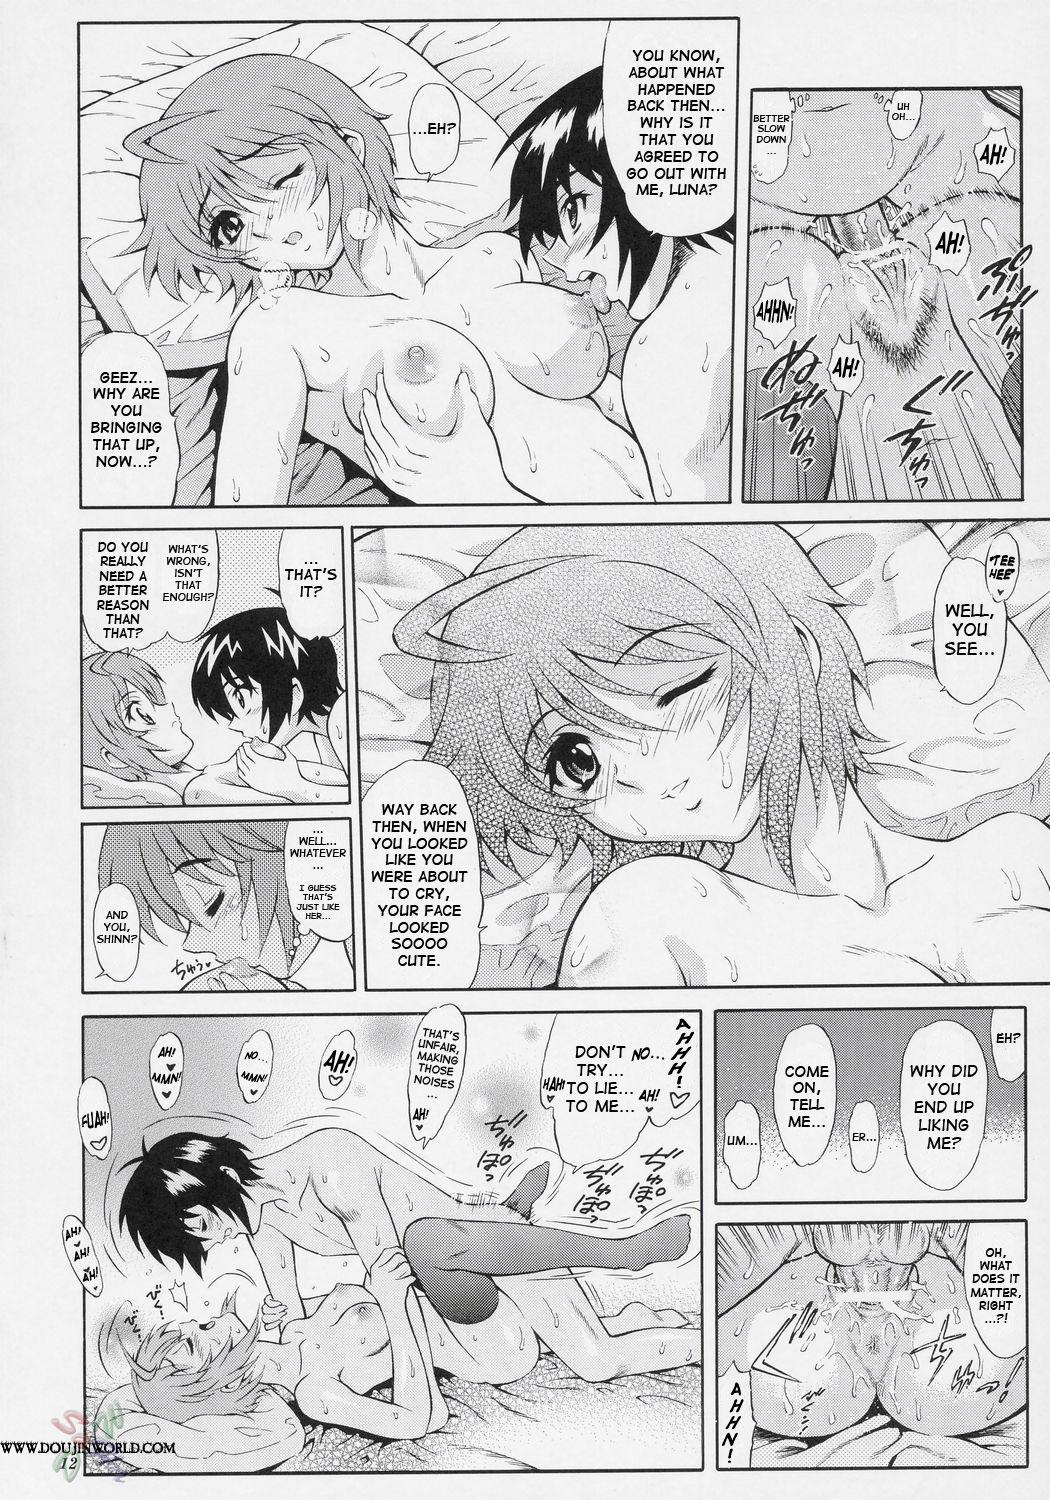 Blowjob Contest Burning!! 2 - Gundam seed destiny Wives - Page 11